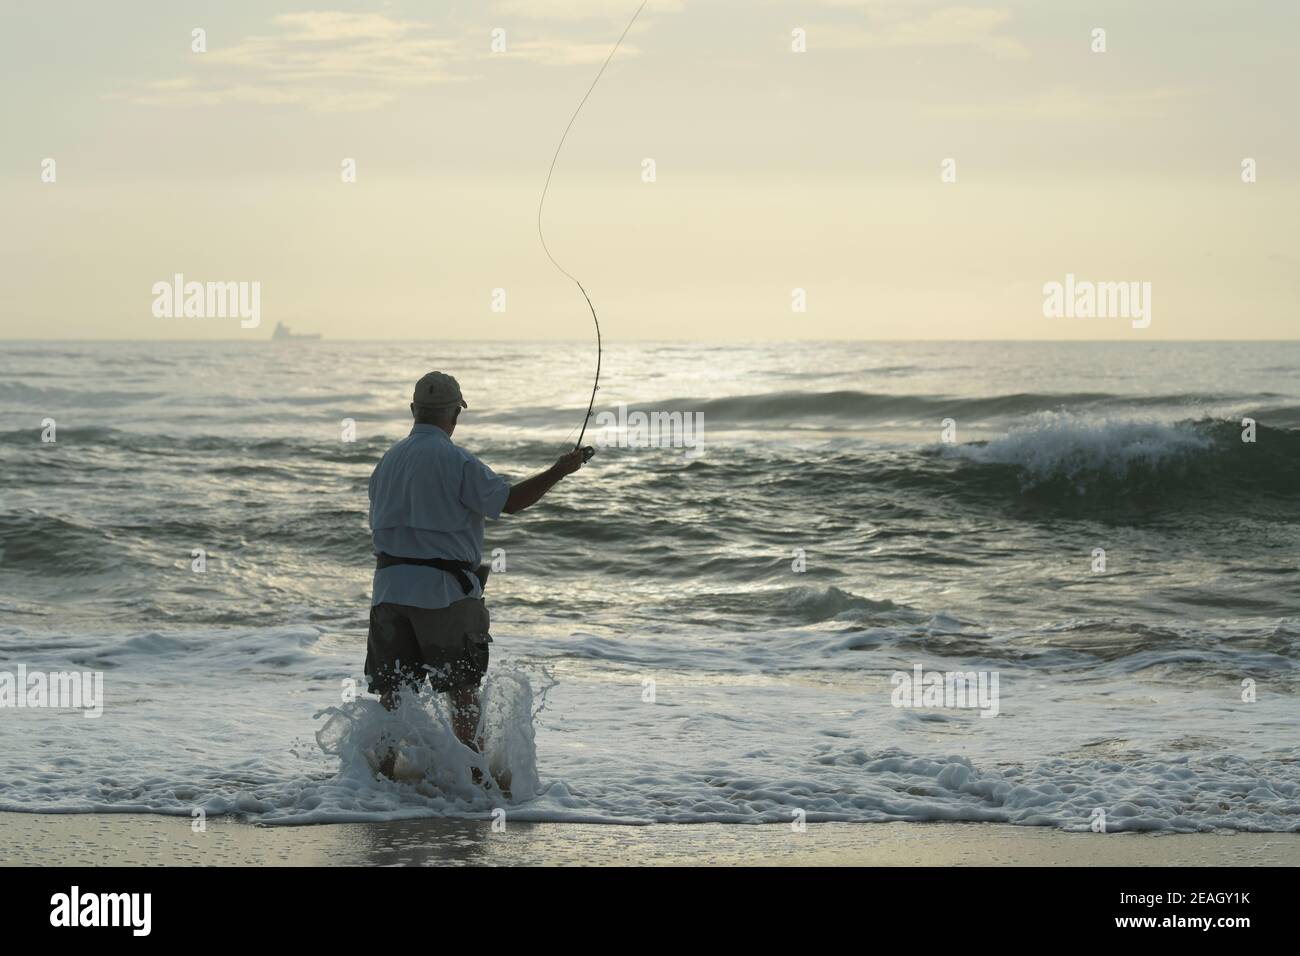 Fly fishing, people, sport, single adult man casting lure into sea,  fisherman, Durban, South Africa, beautiful landscape, saltwater, beach  activity Stock Photo - Alamy